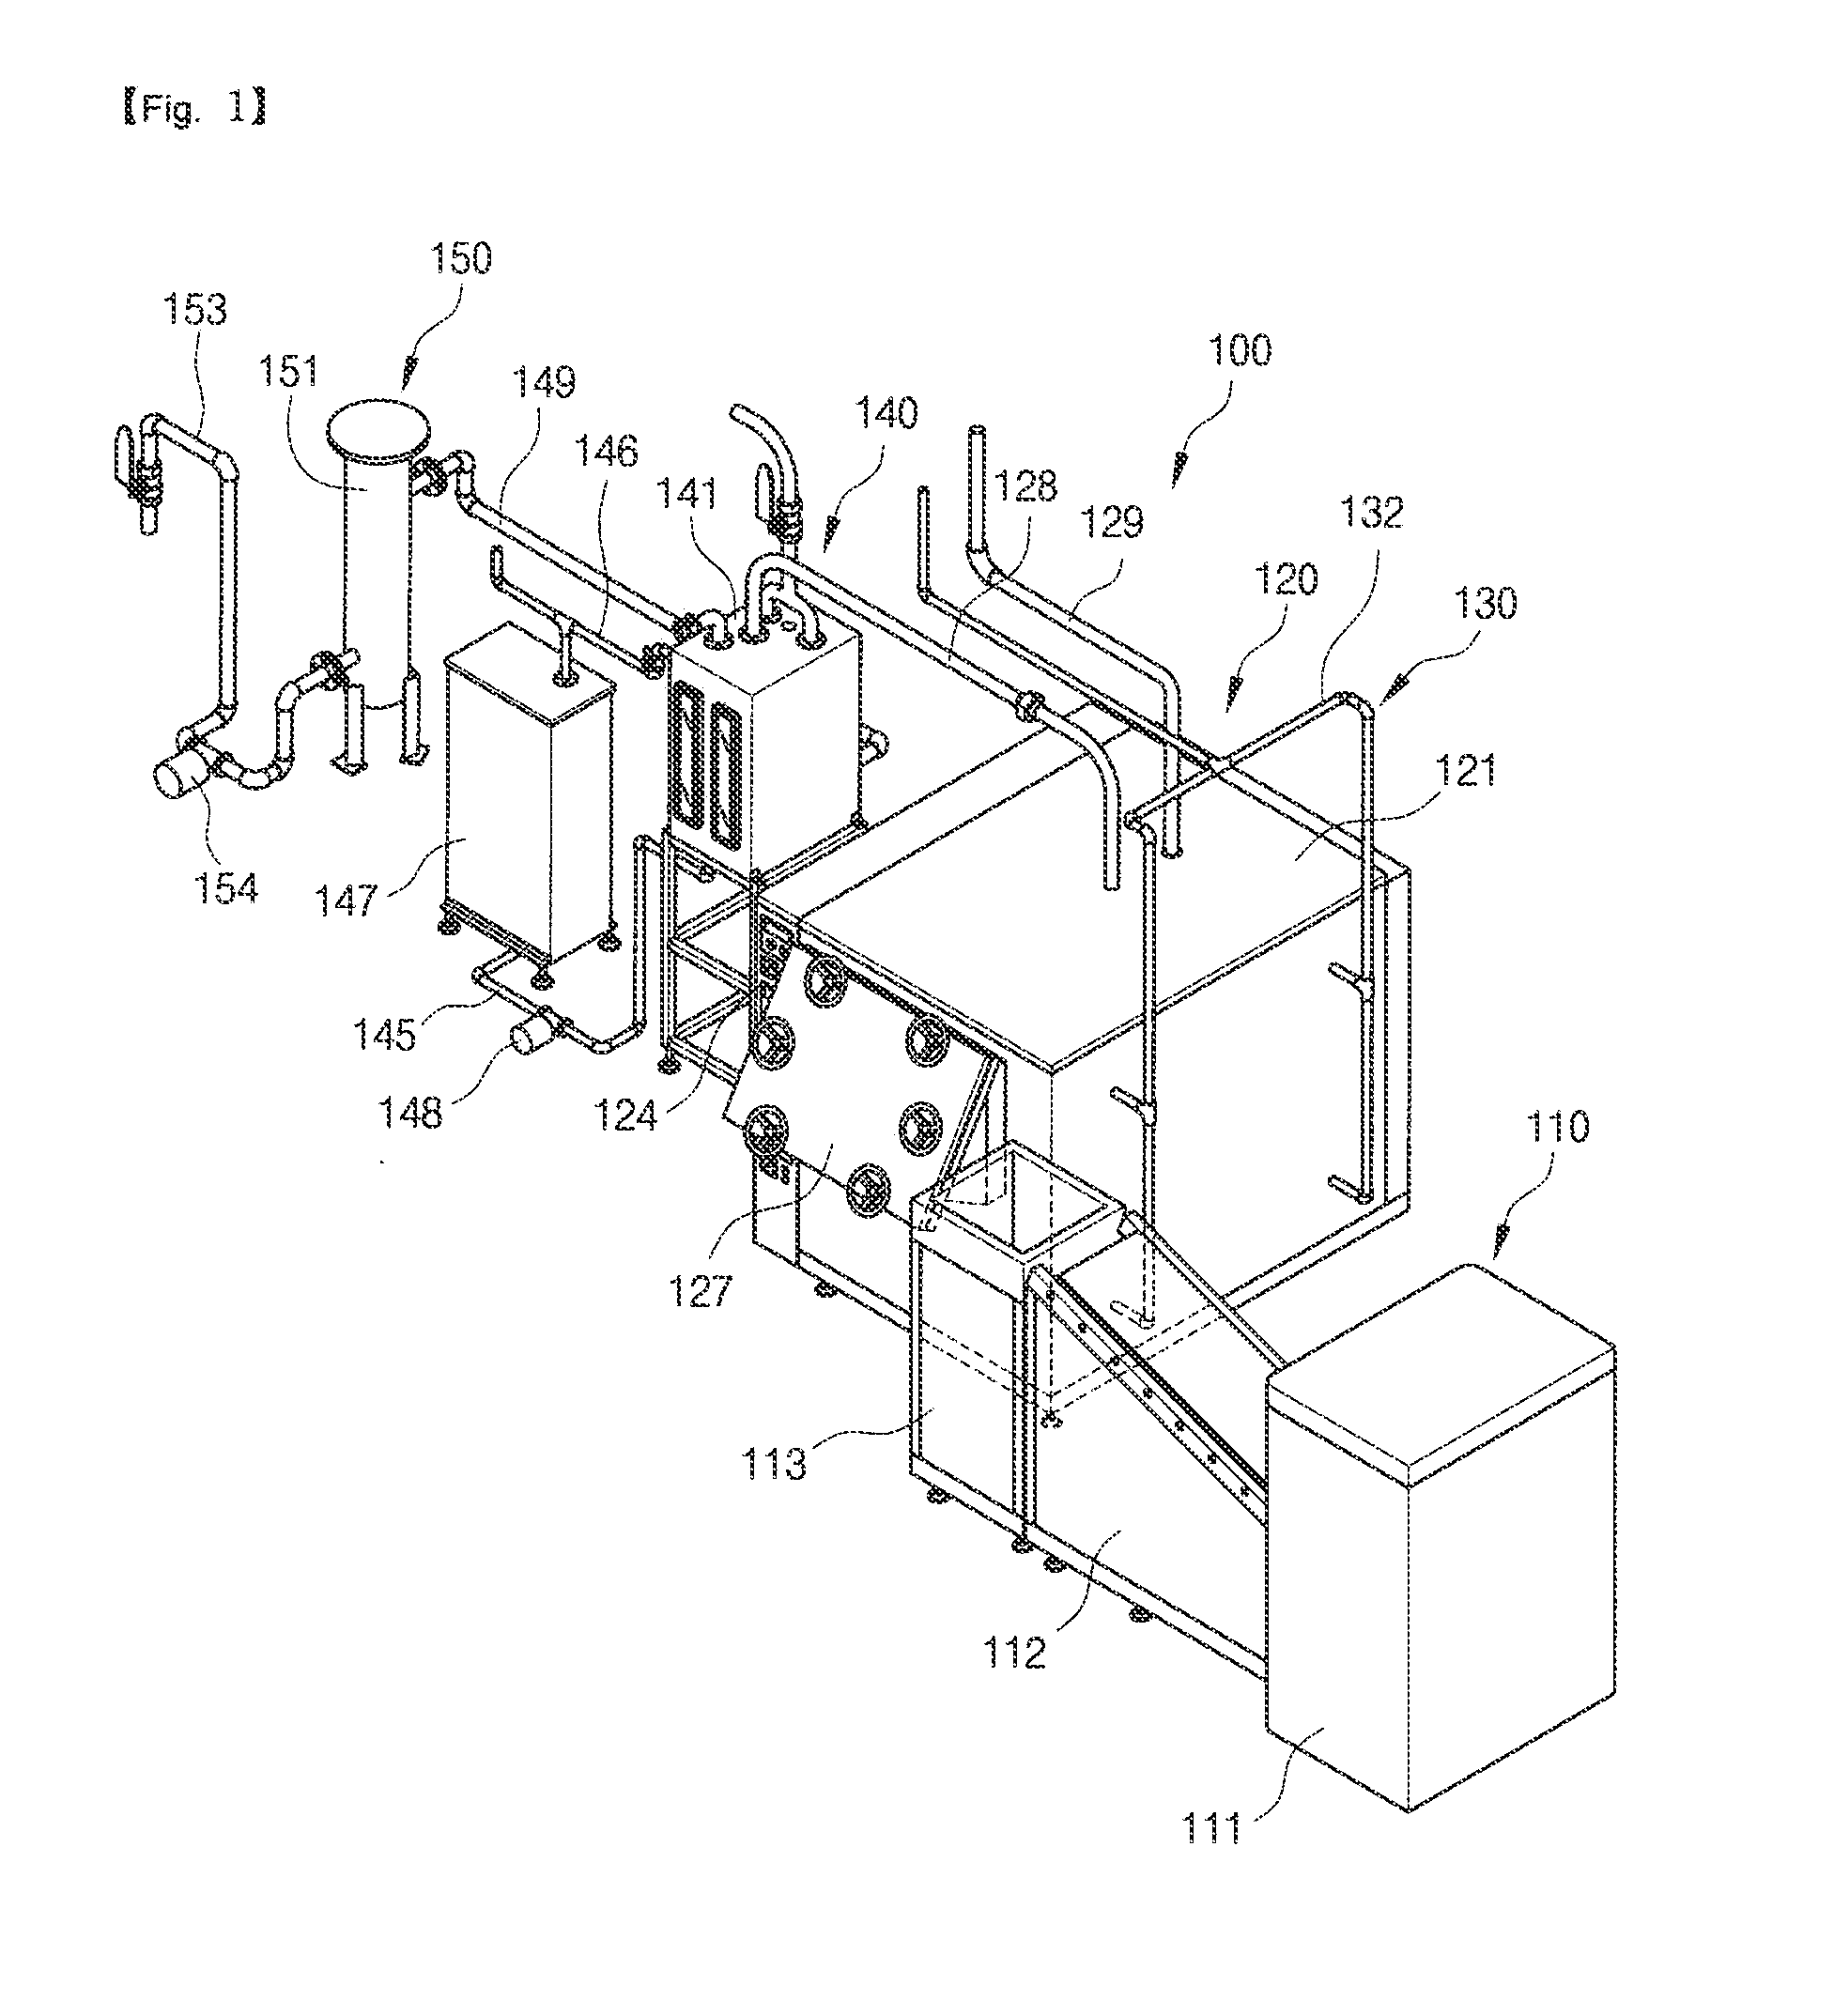 Apparatus for restoring waste plastic to oil